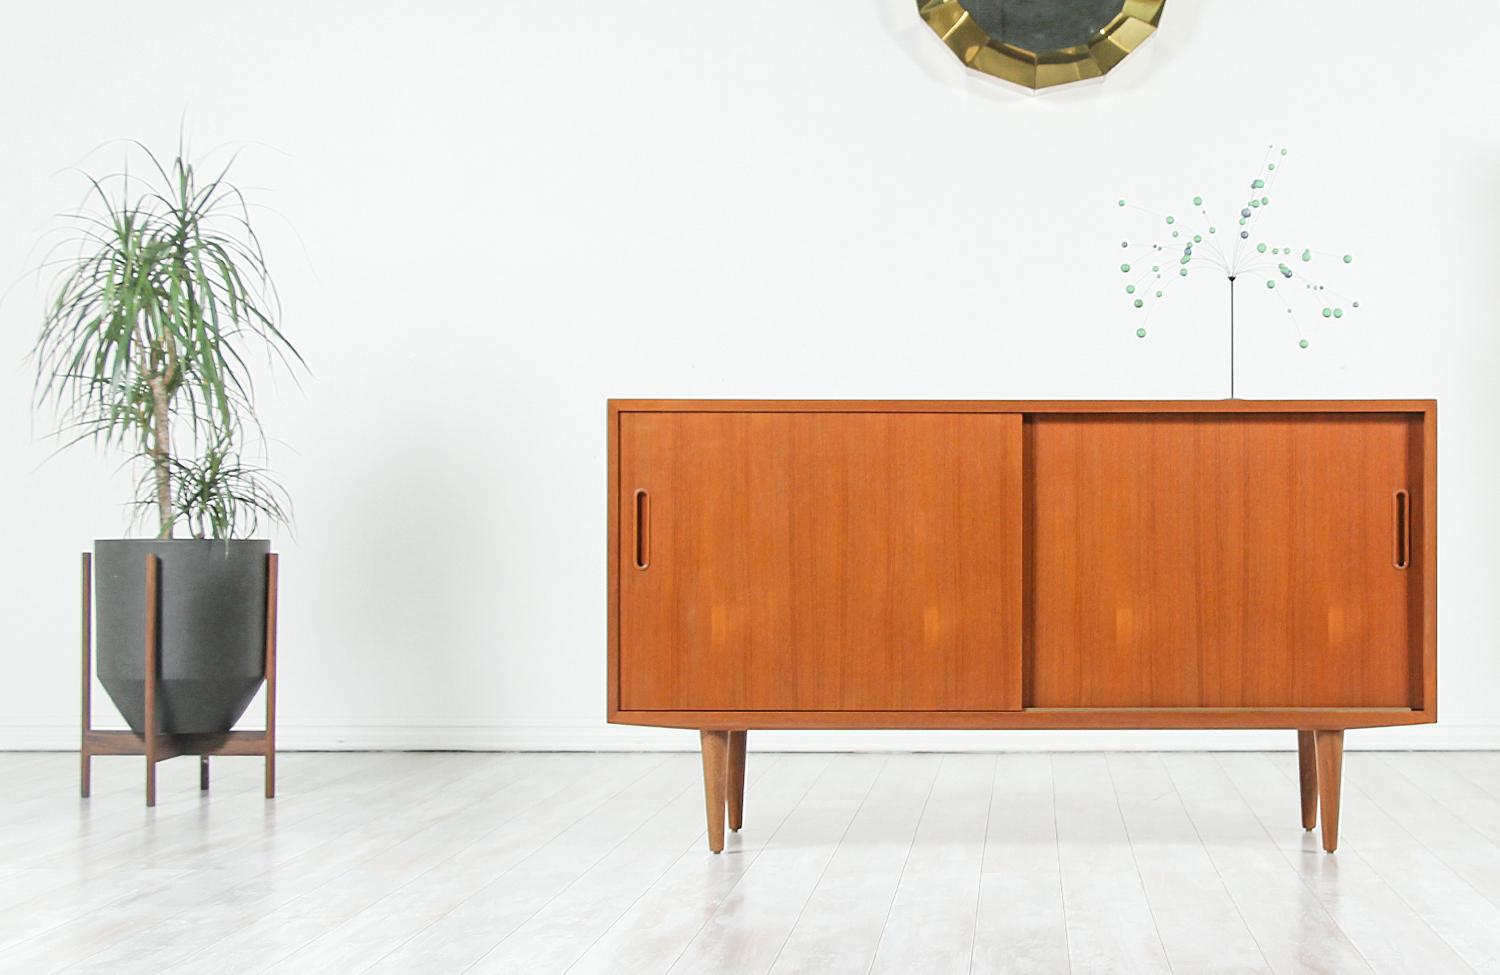 Elegant modern credenza designed by Carlo Jensen for Hundevad & Co. in Denmark, circa 1960s. This compact credenza features a sturdy teak wood construction sitting on four tapered legs with warm teak grain detail on the case and beechwood interior.